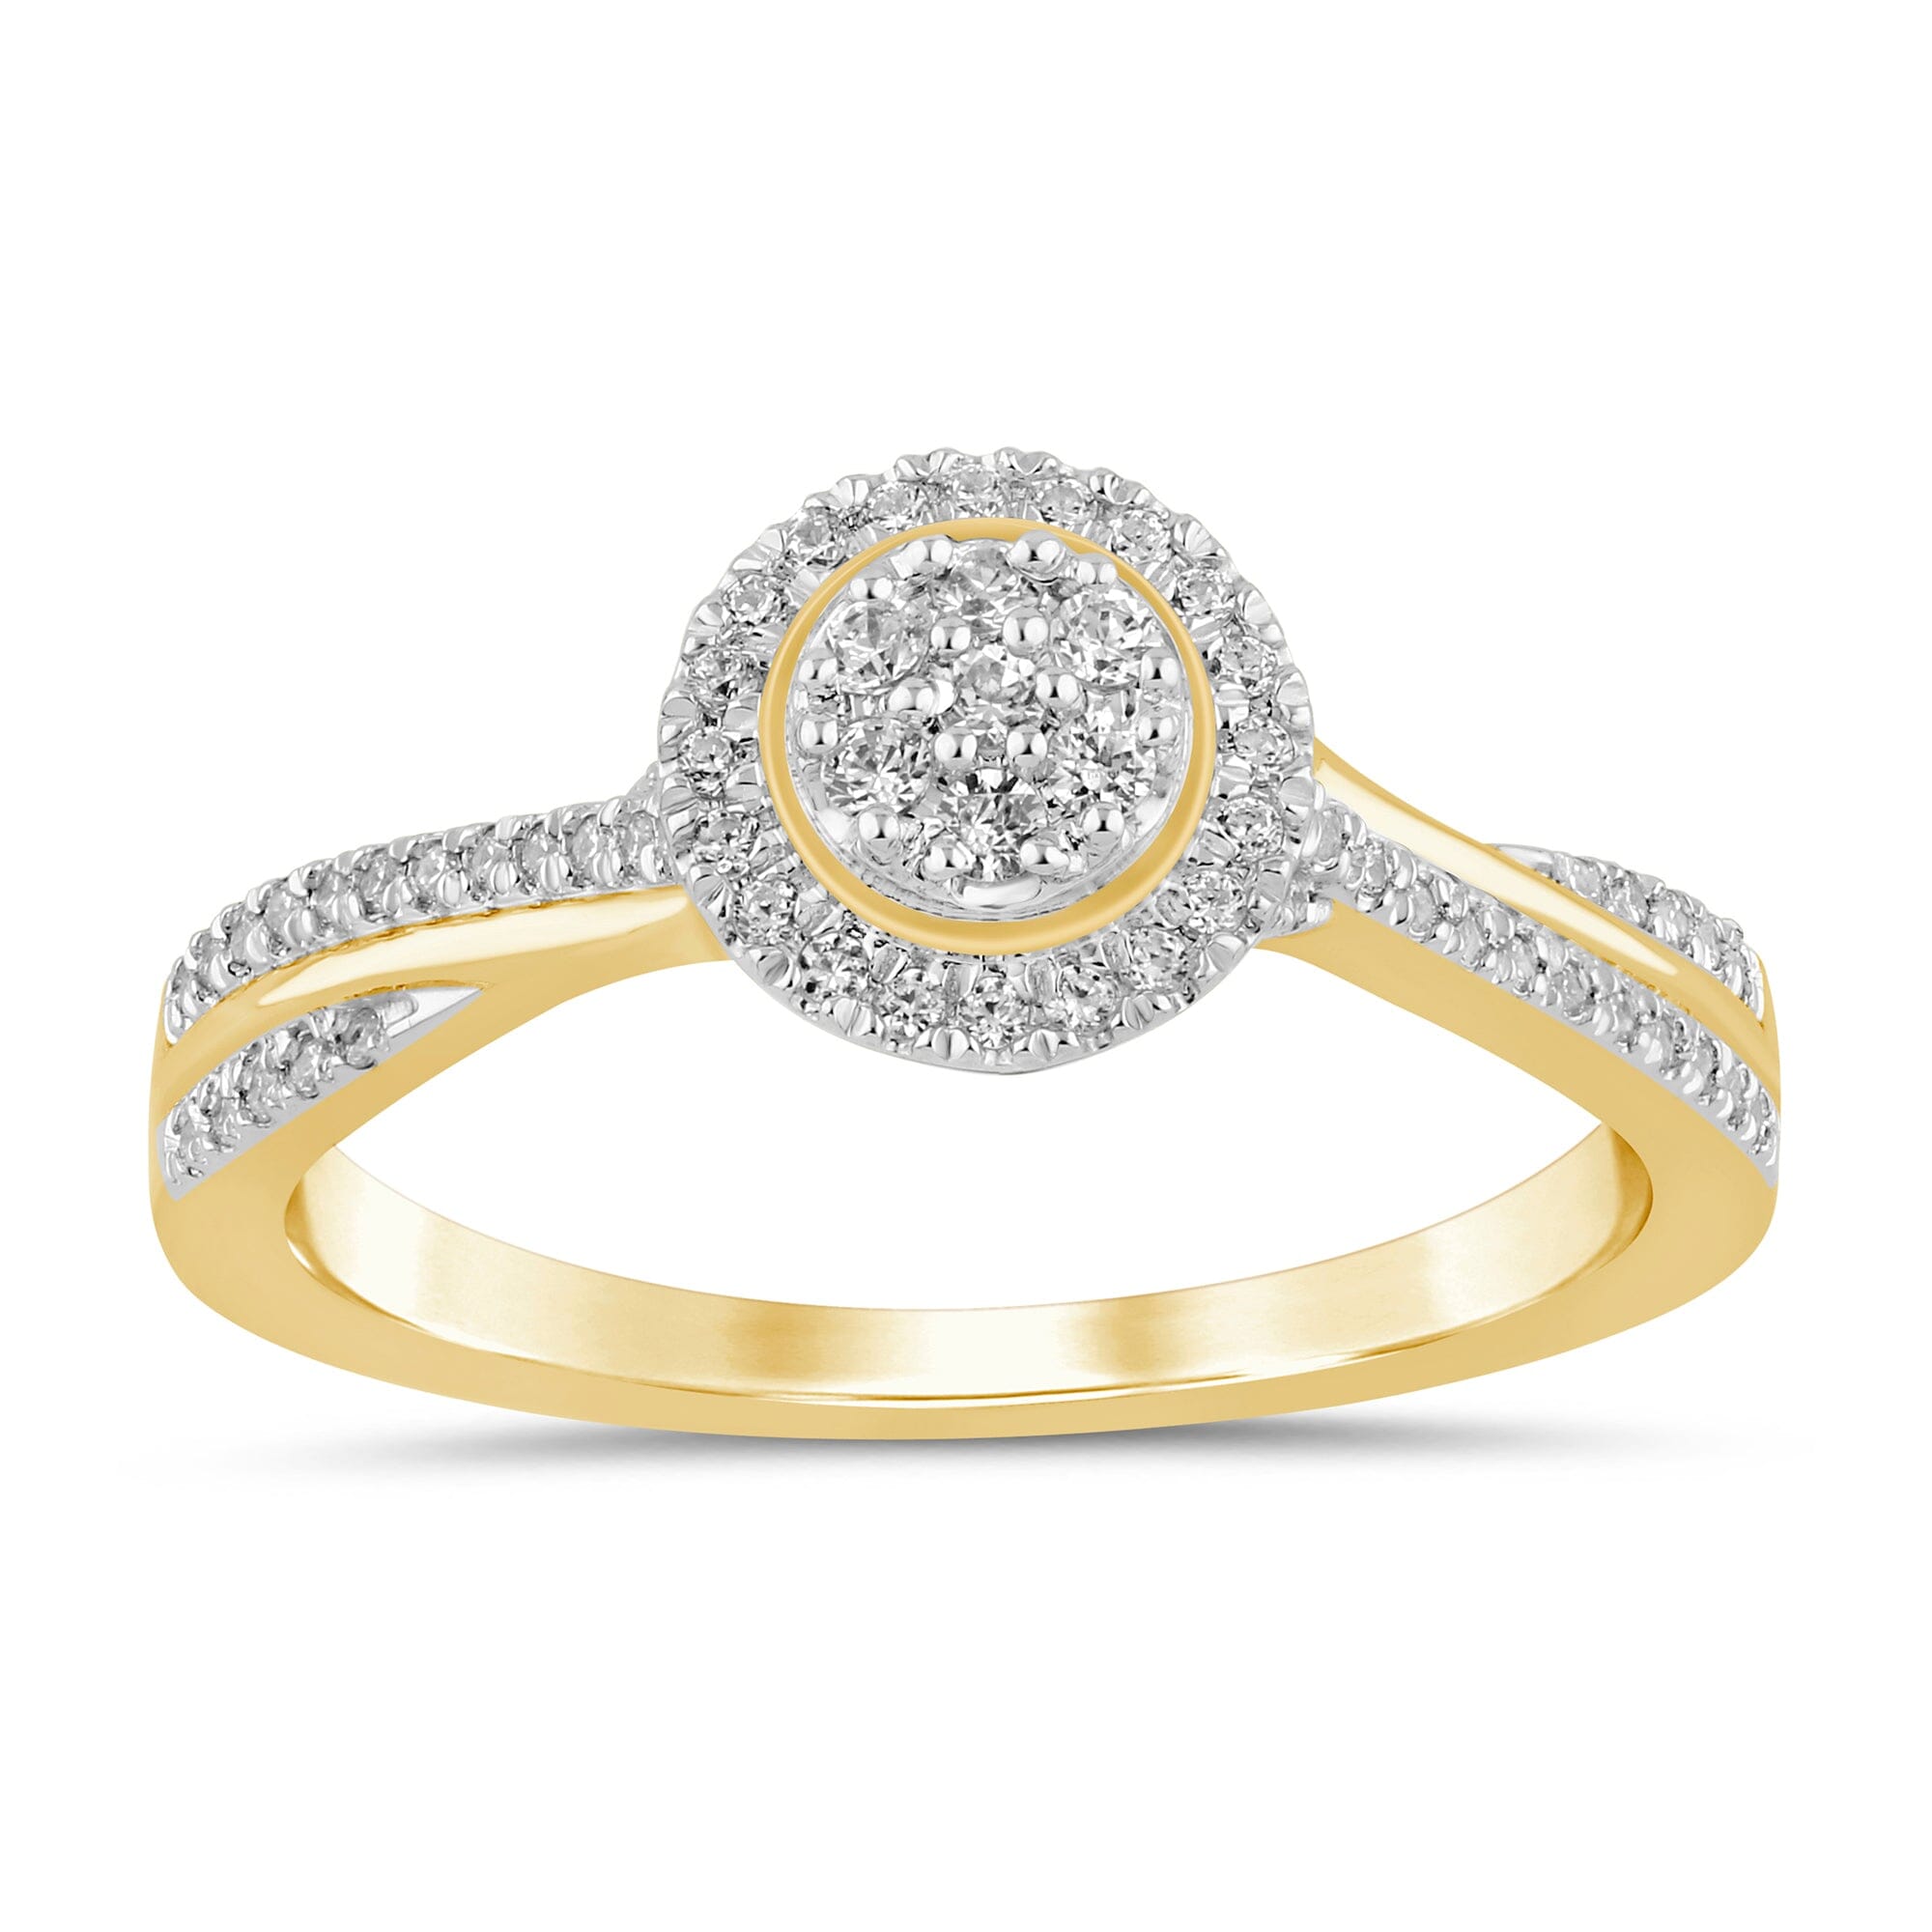 Halo Ring with 1/4ct of Diamonds in 9ct Yellow Gold Rings Bevilles 